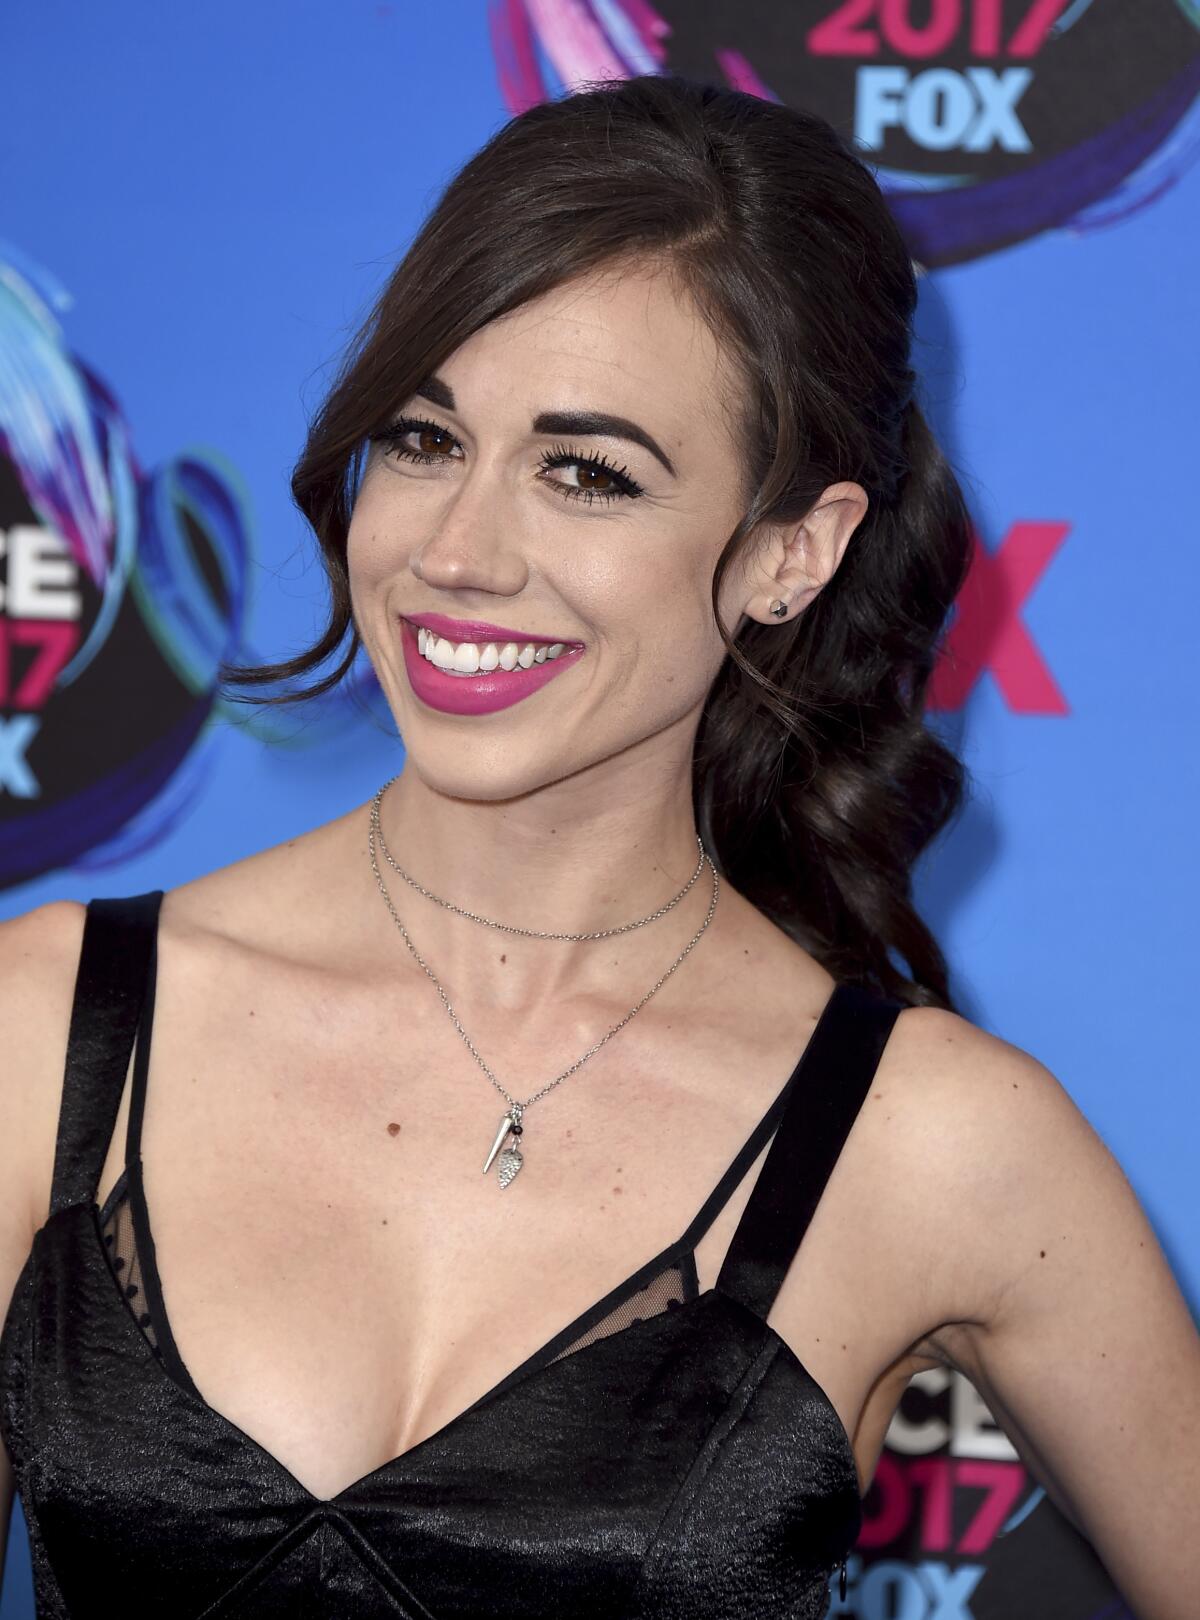 Colleen Ballinger with bangs and a ponytail wearing a strappy black dress against a blue backdrop